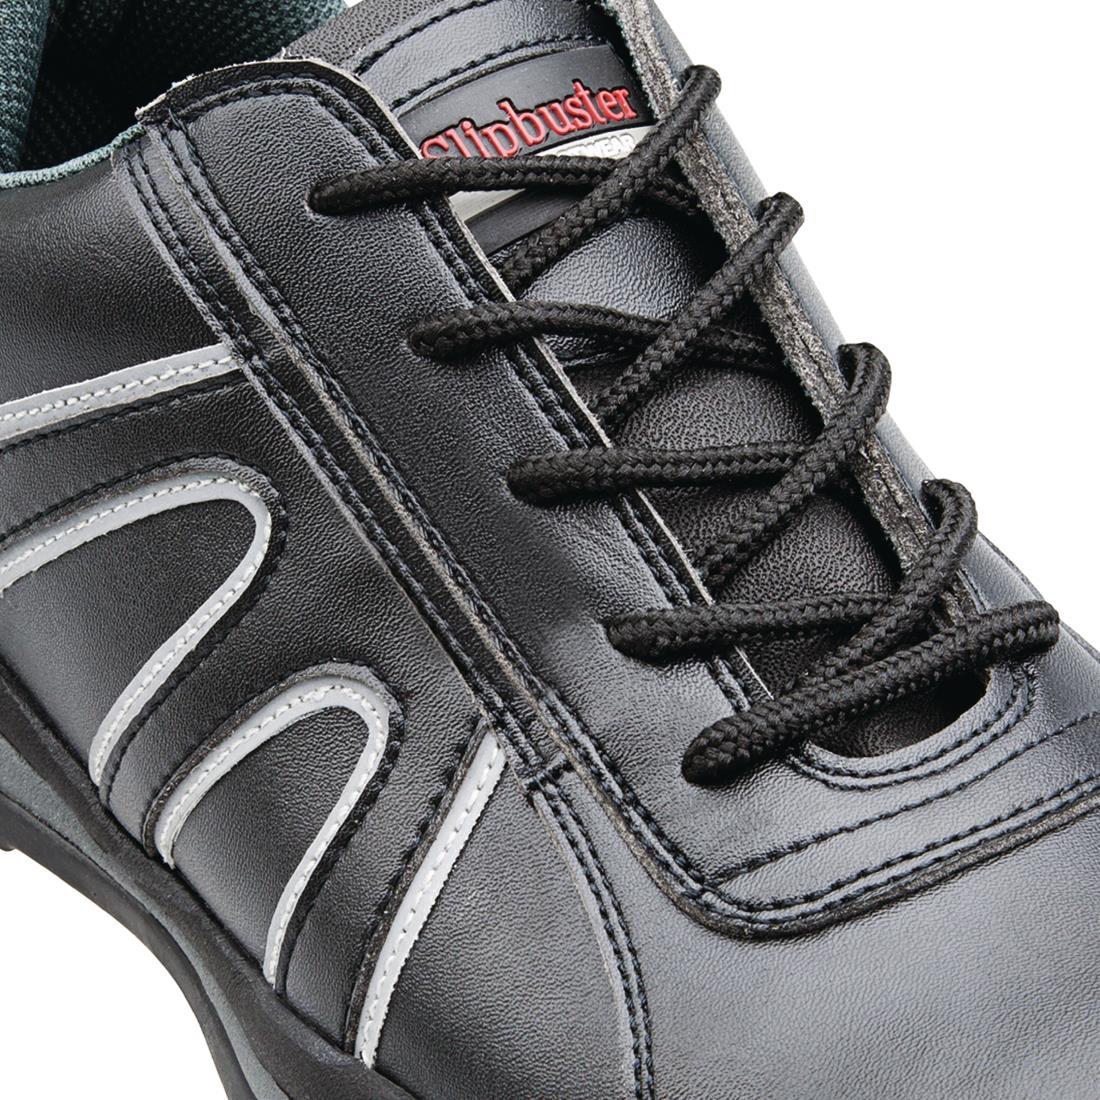 Slipbuster Safety Trainers Black 47 - A708-47  - 3